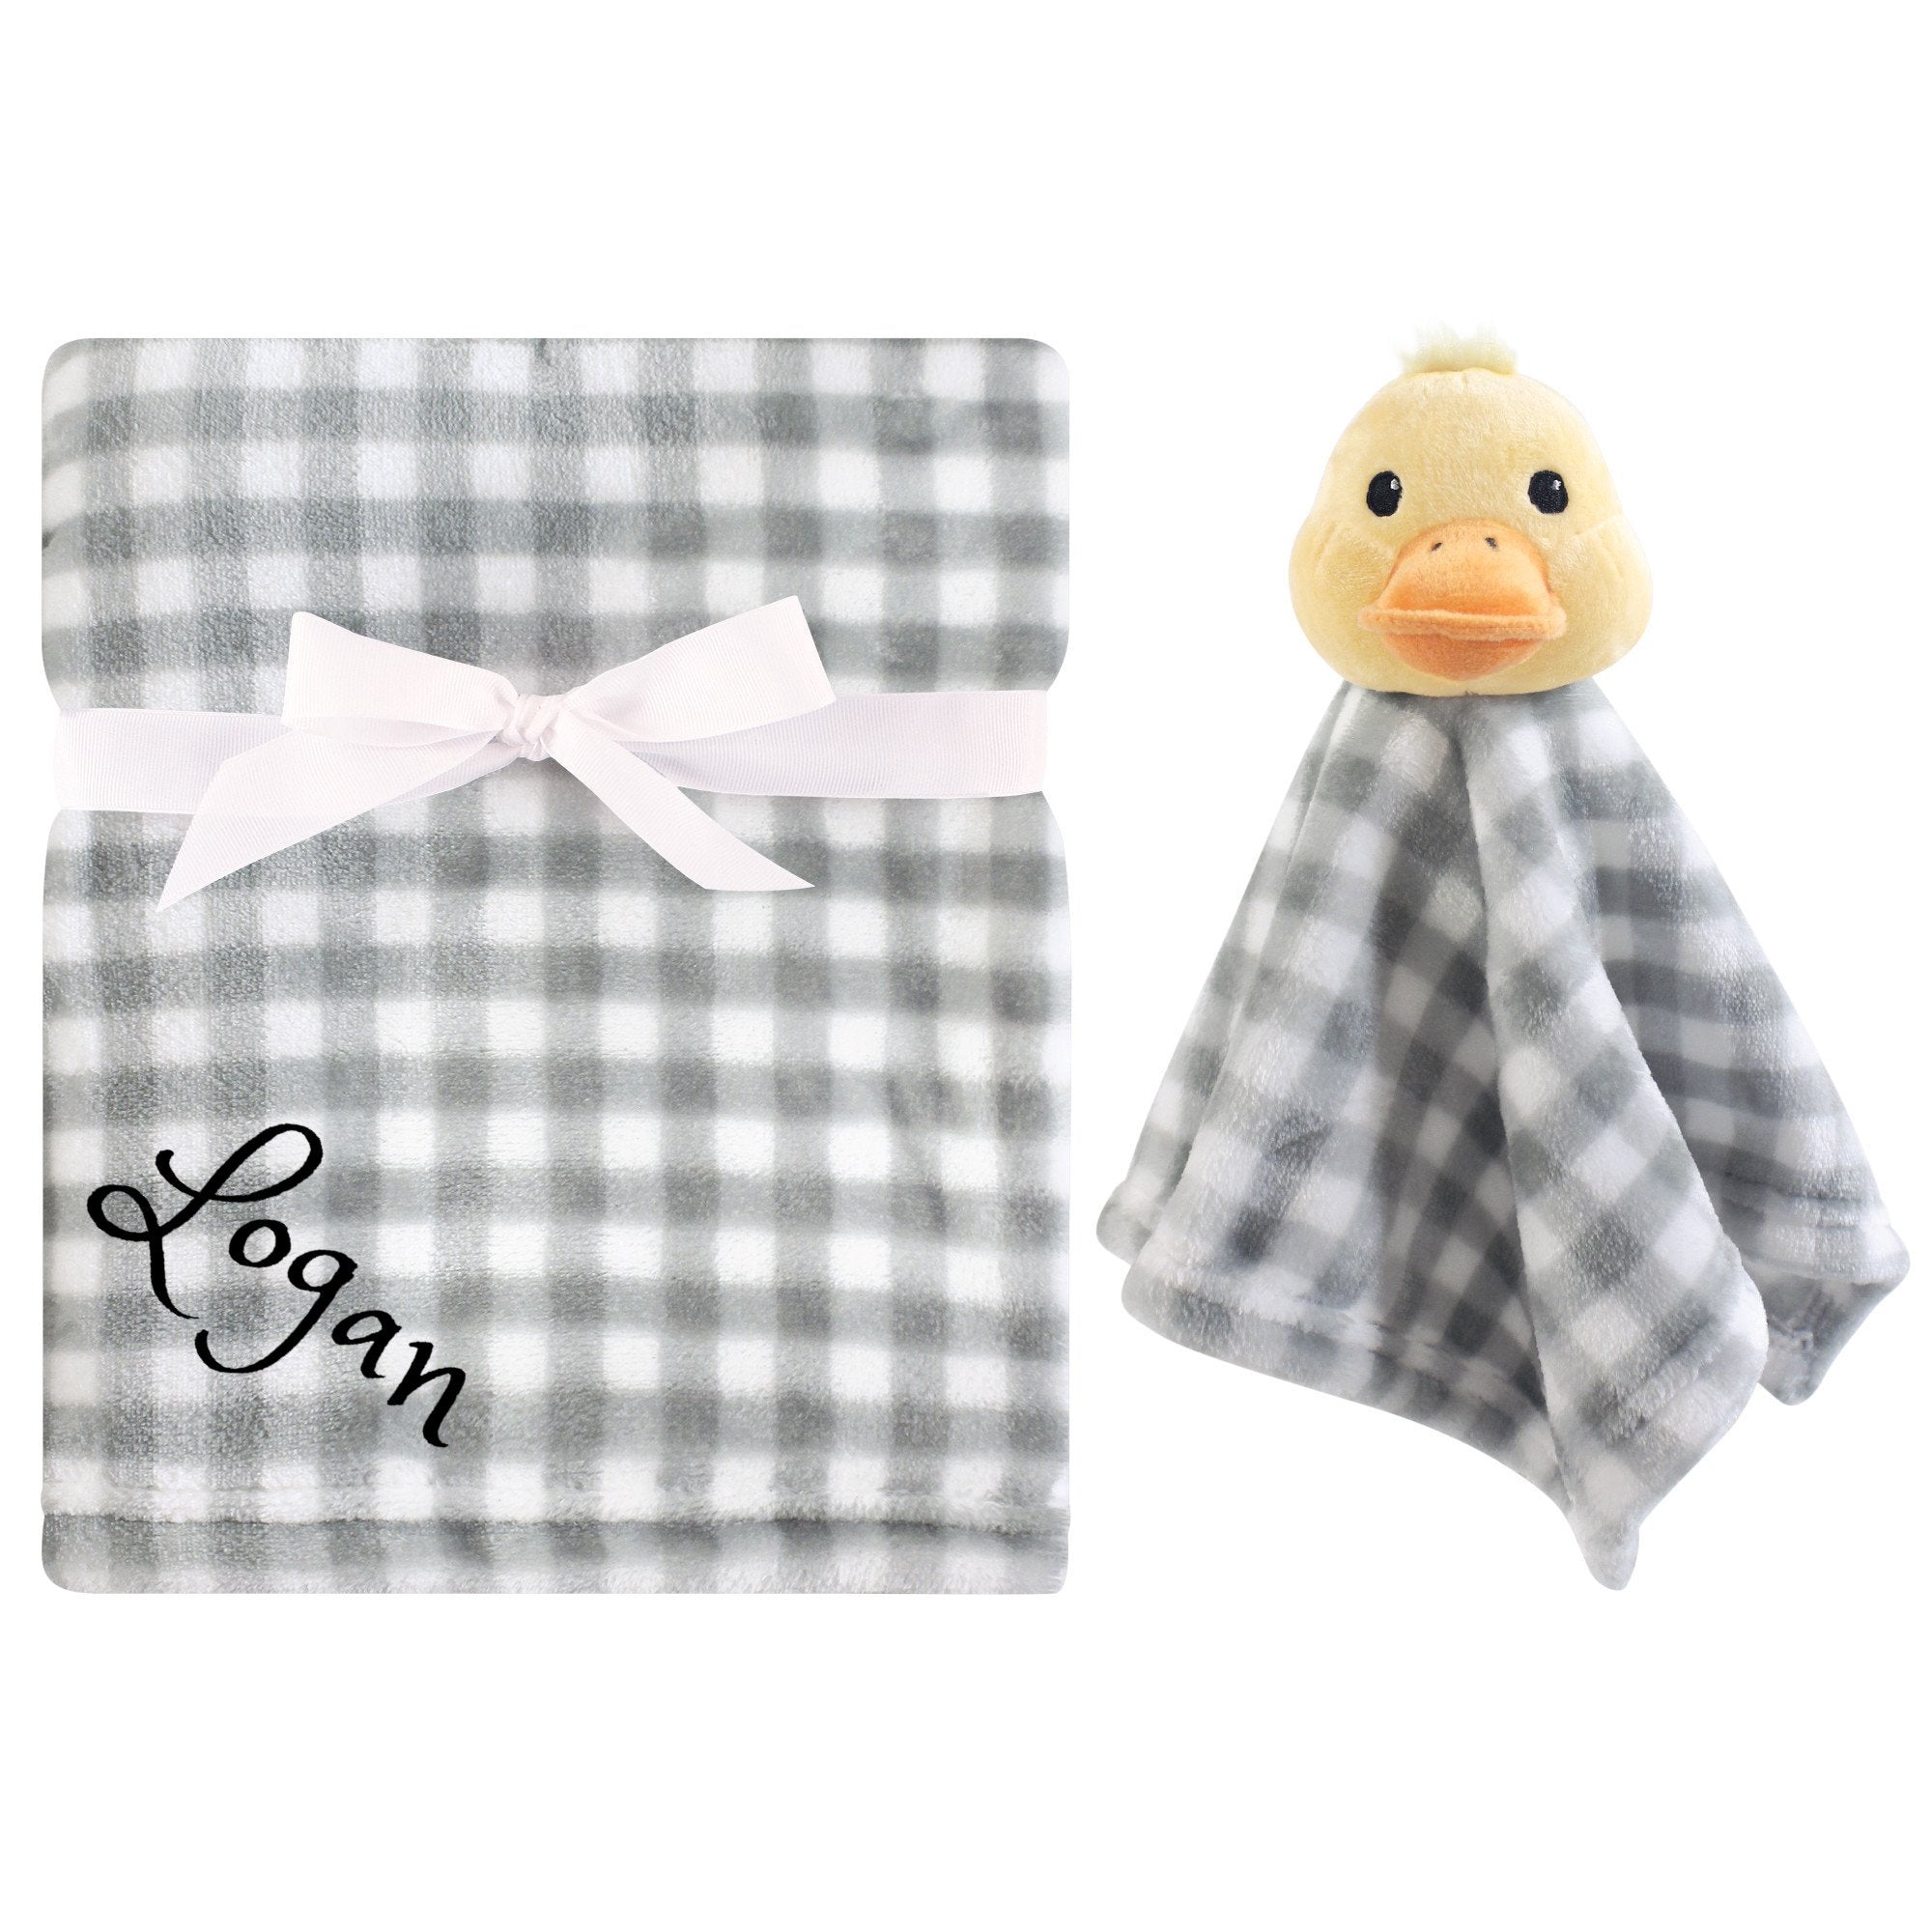 Personalized Animal Blanket & security blanket Set For Baby - Duck